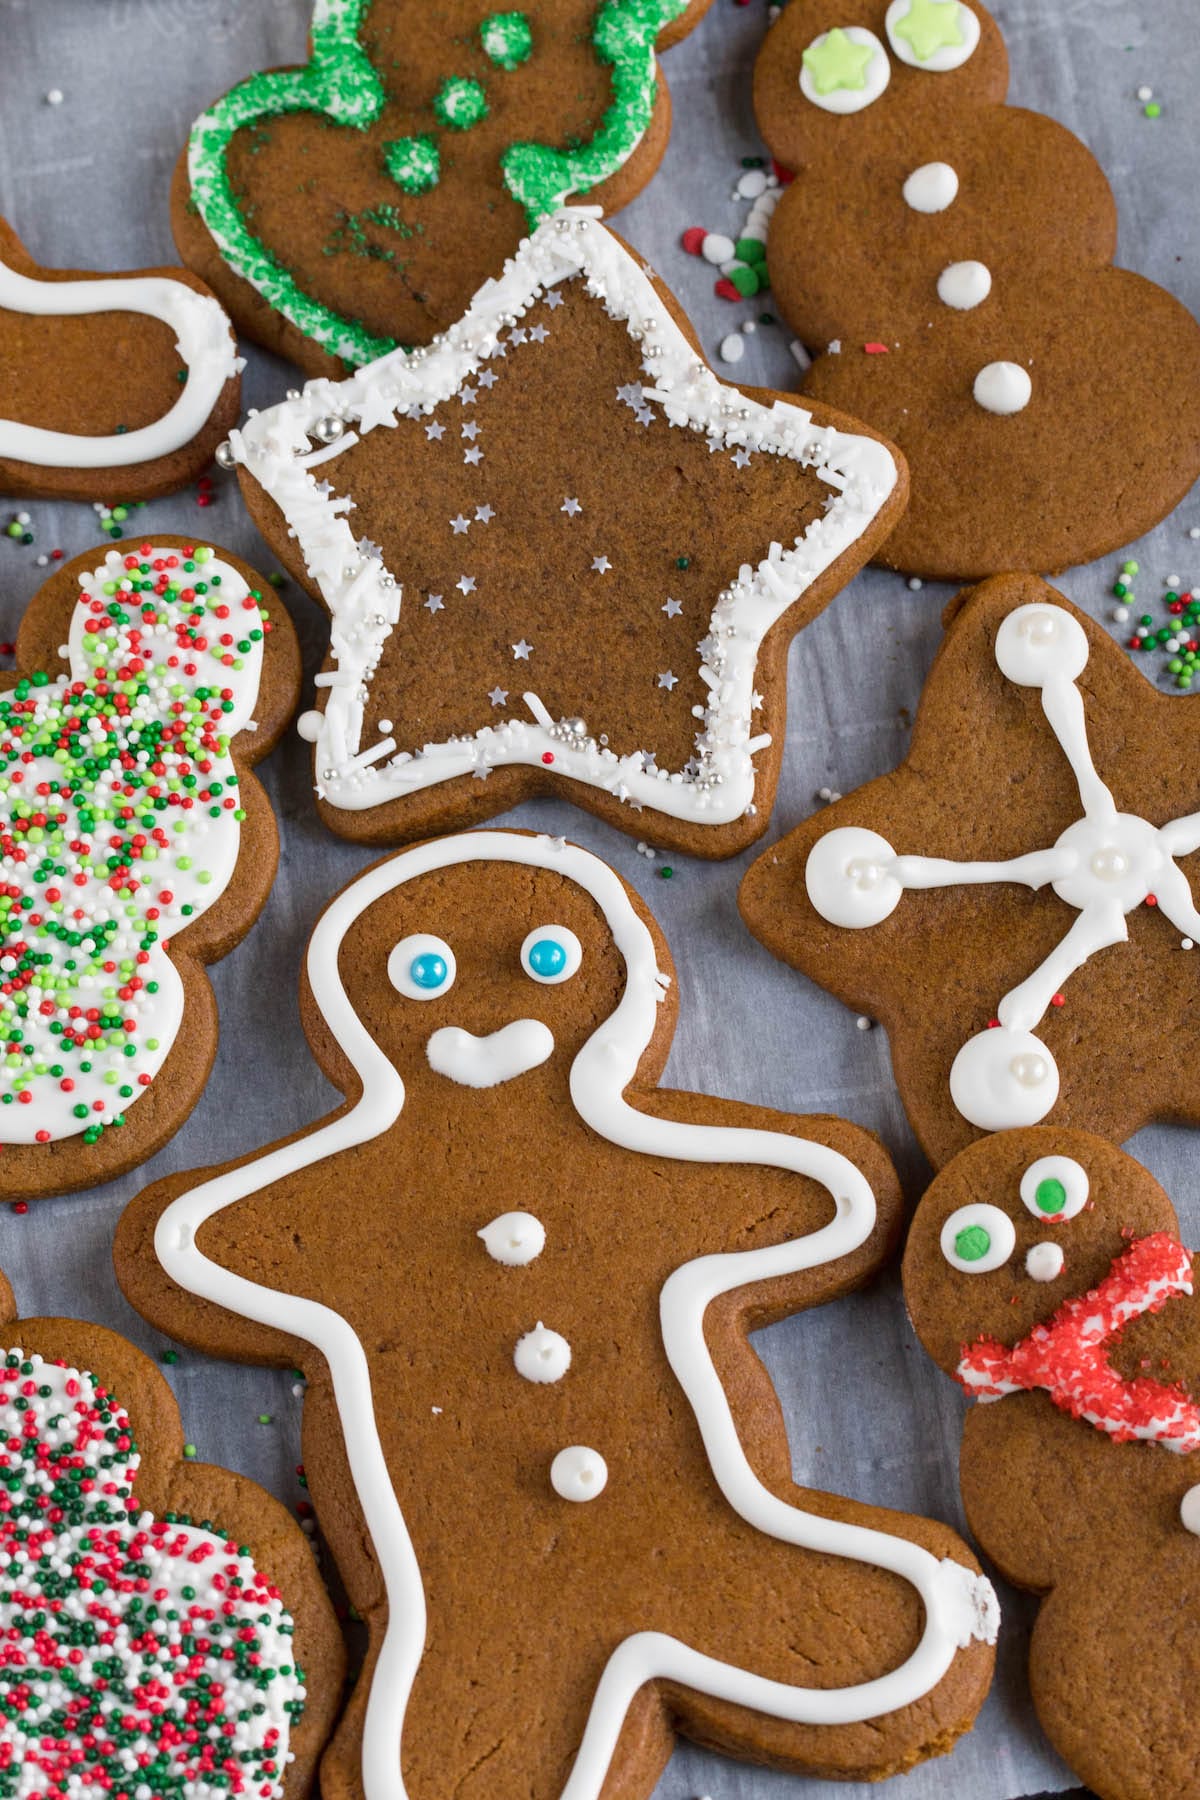 gingerbread man, snowmen and stars cutouts of gingerbread cookie dough with royal icing